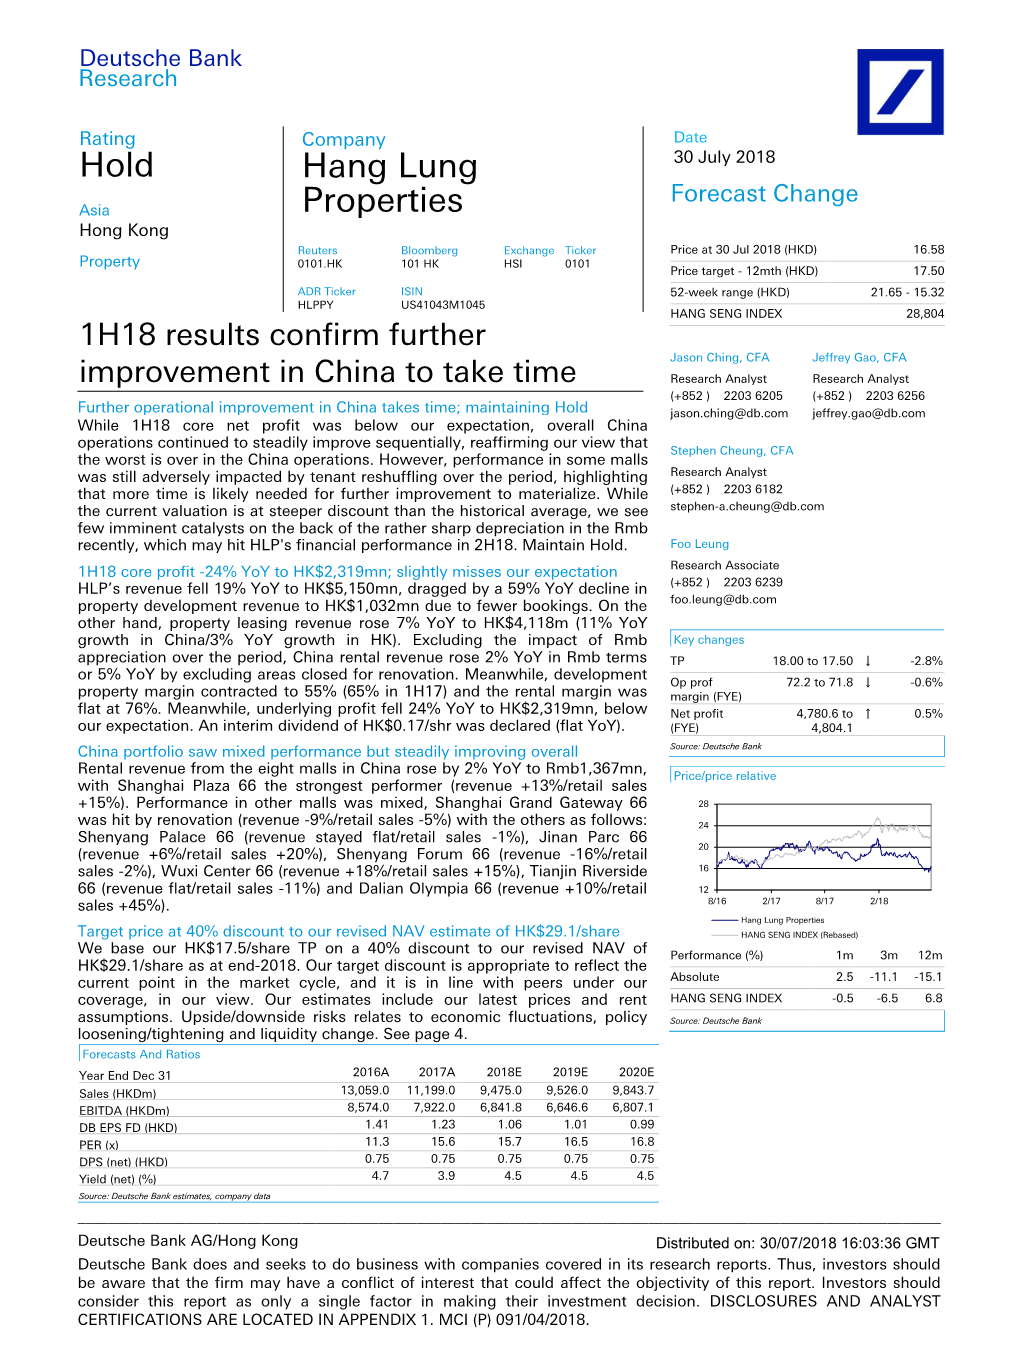 Hang Lung Properties Target Price at 40% Discount to Our Revised NAV Estimate of HK$29.1/Share HANG SENG INDEX (Rebased)